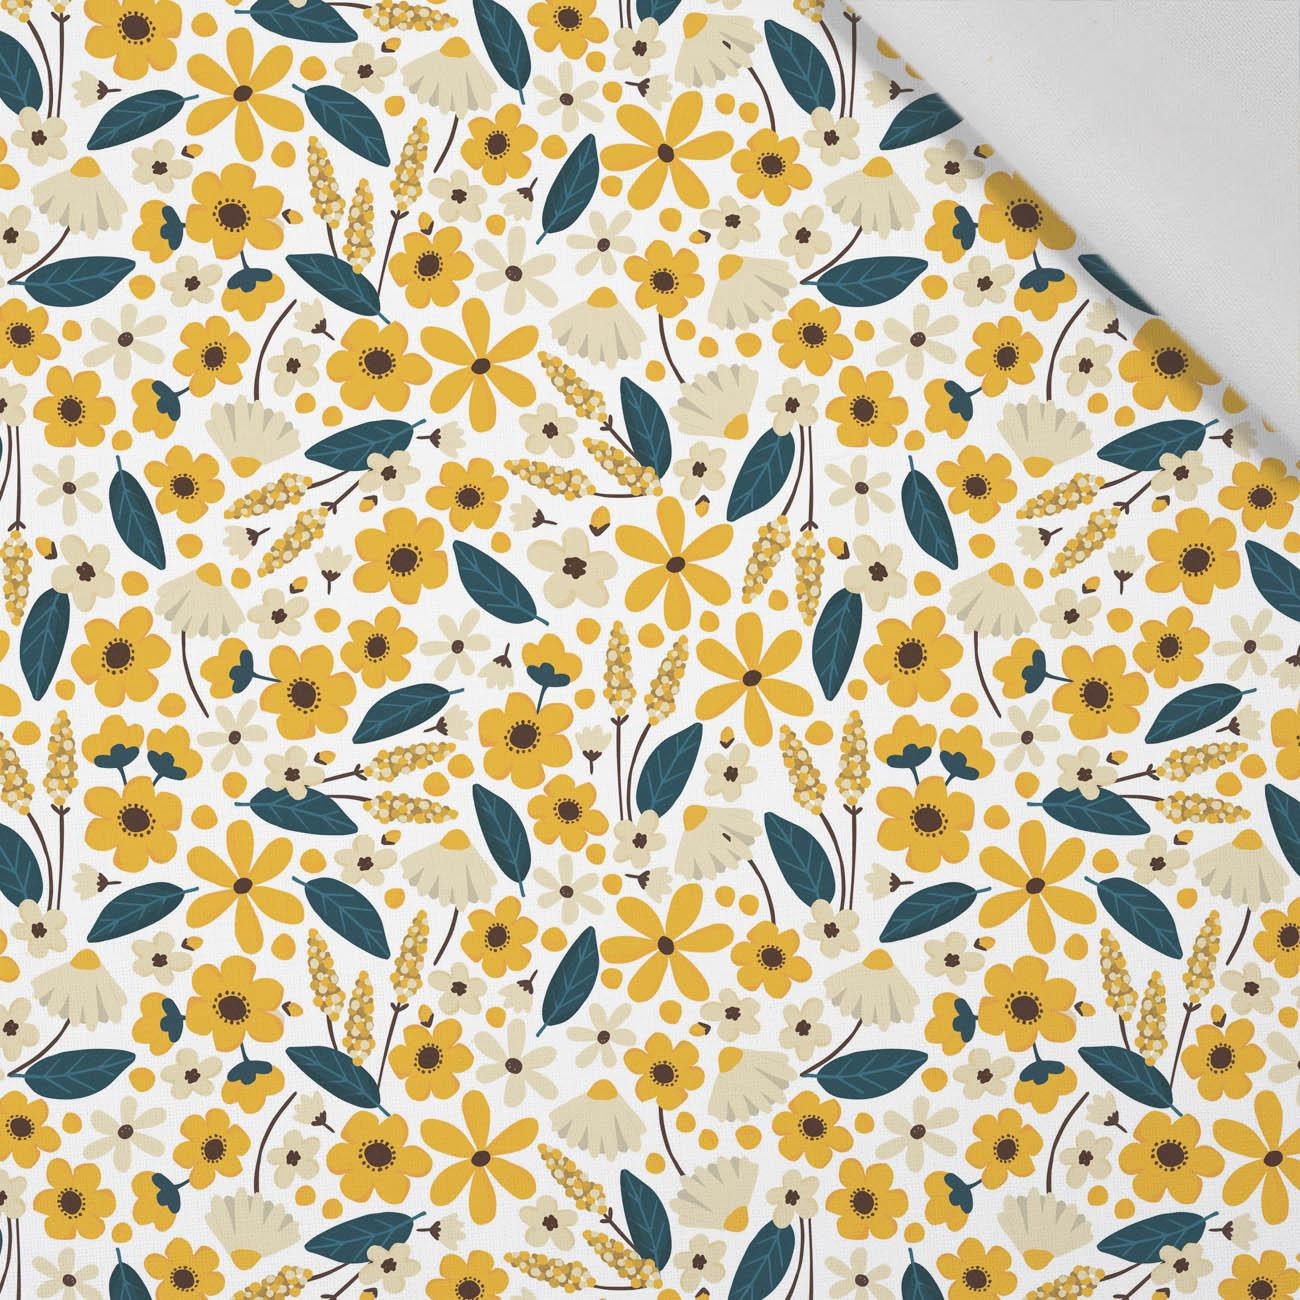 SMALL FLOWERS pat. 2 / white - Cotton woven fabric